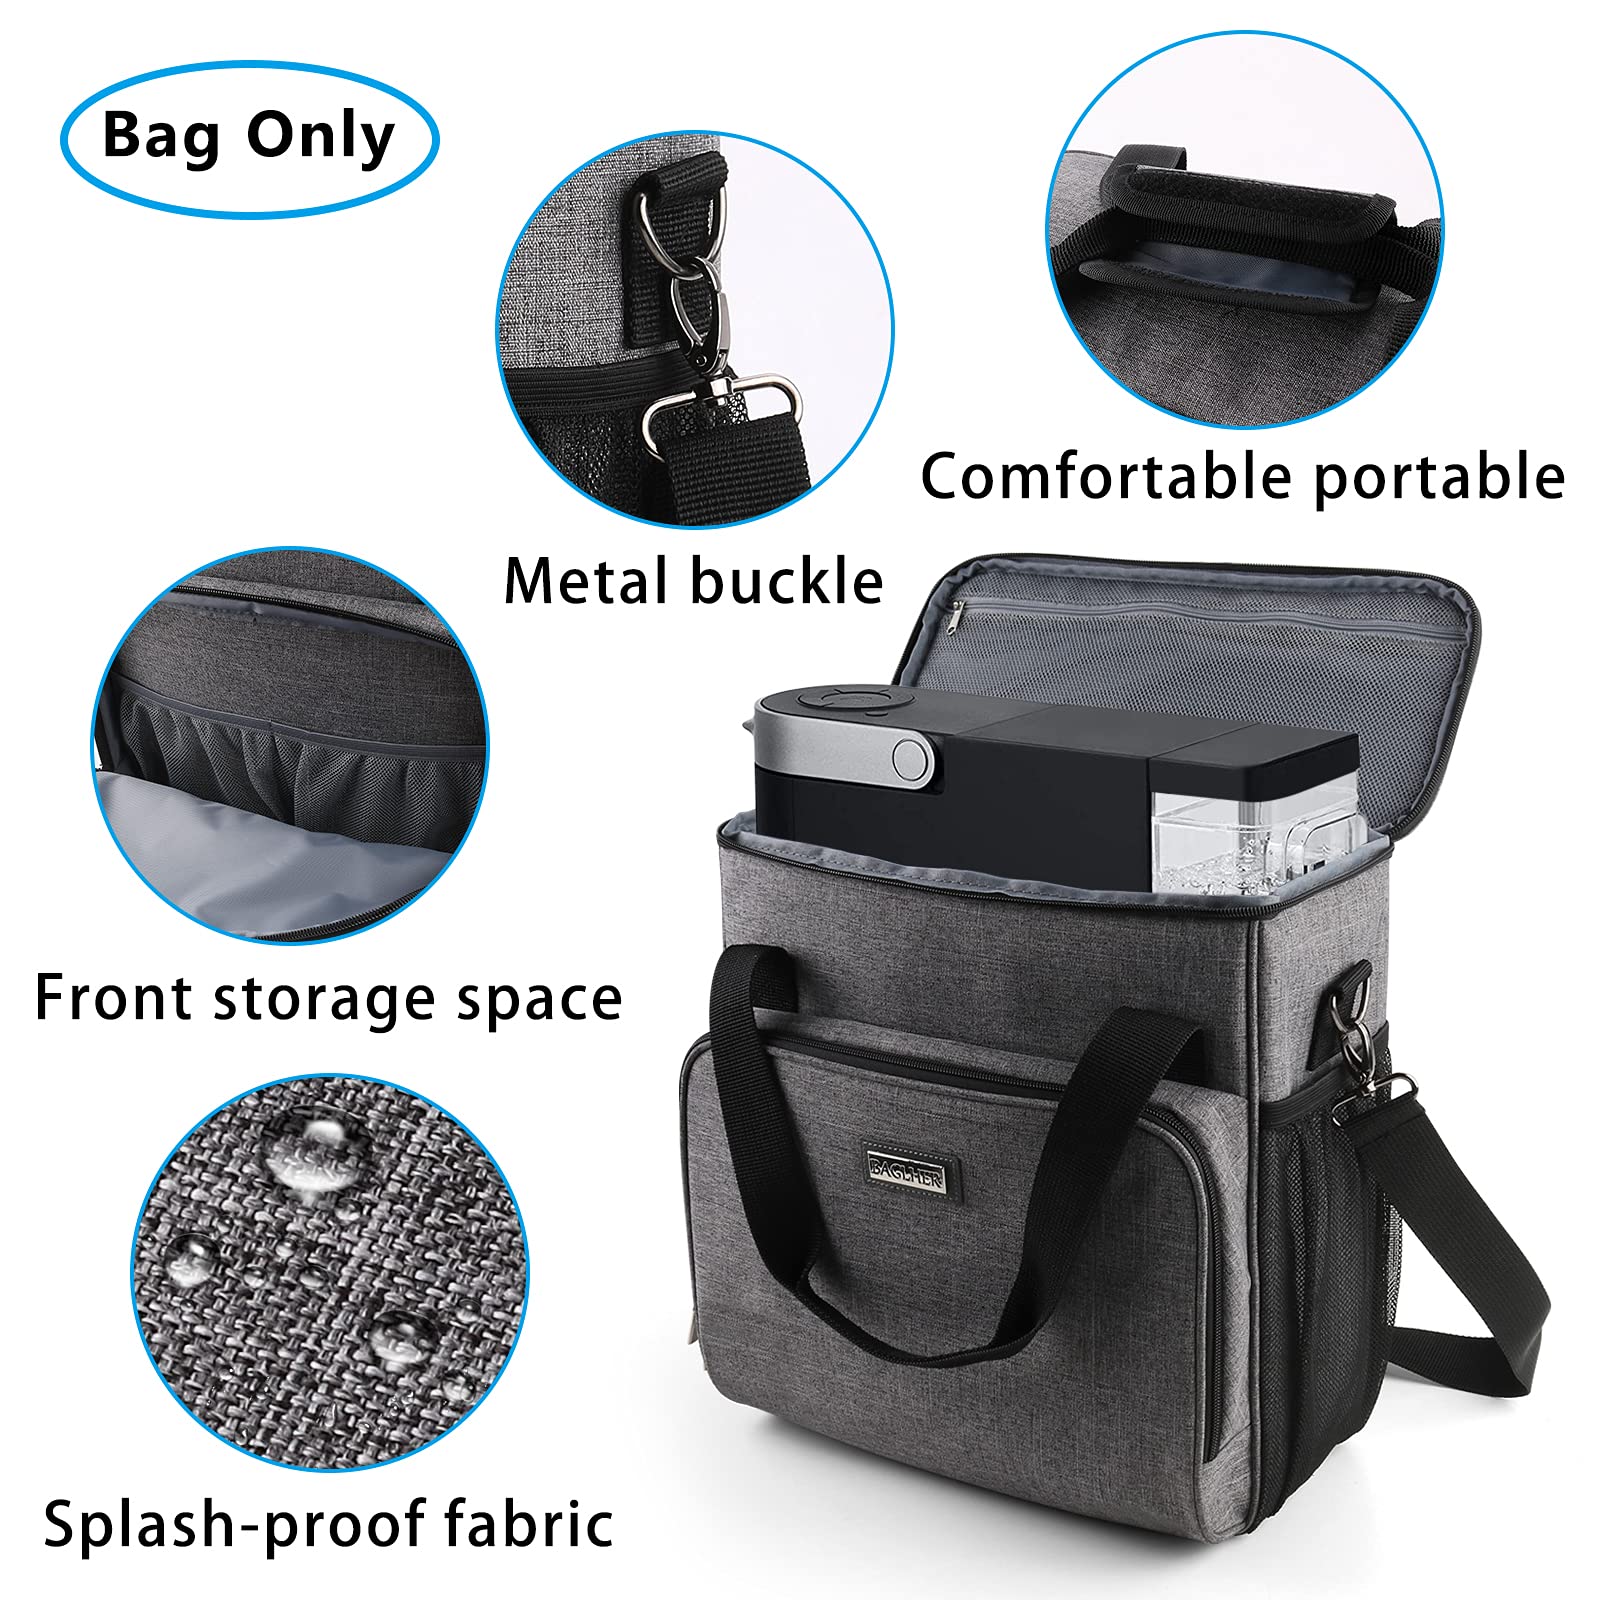 BAGLHER Coffee Maker Storage Bag, Waterproof Travel Carrying Organizer Case, Suitable for Kering Coffee Machines and Other Accessories, Dustproof Tote Bag with Shoulder Strap Grey